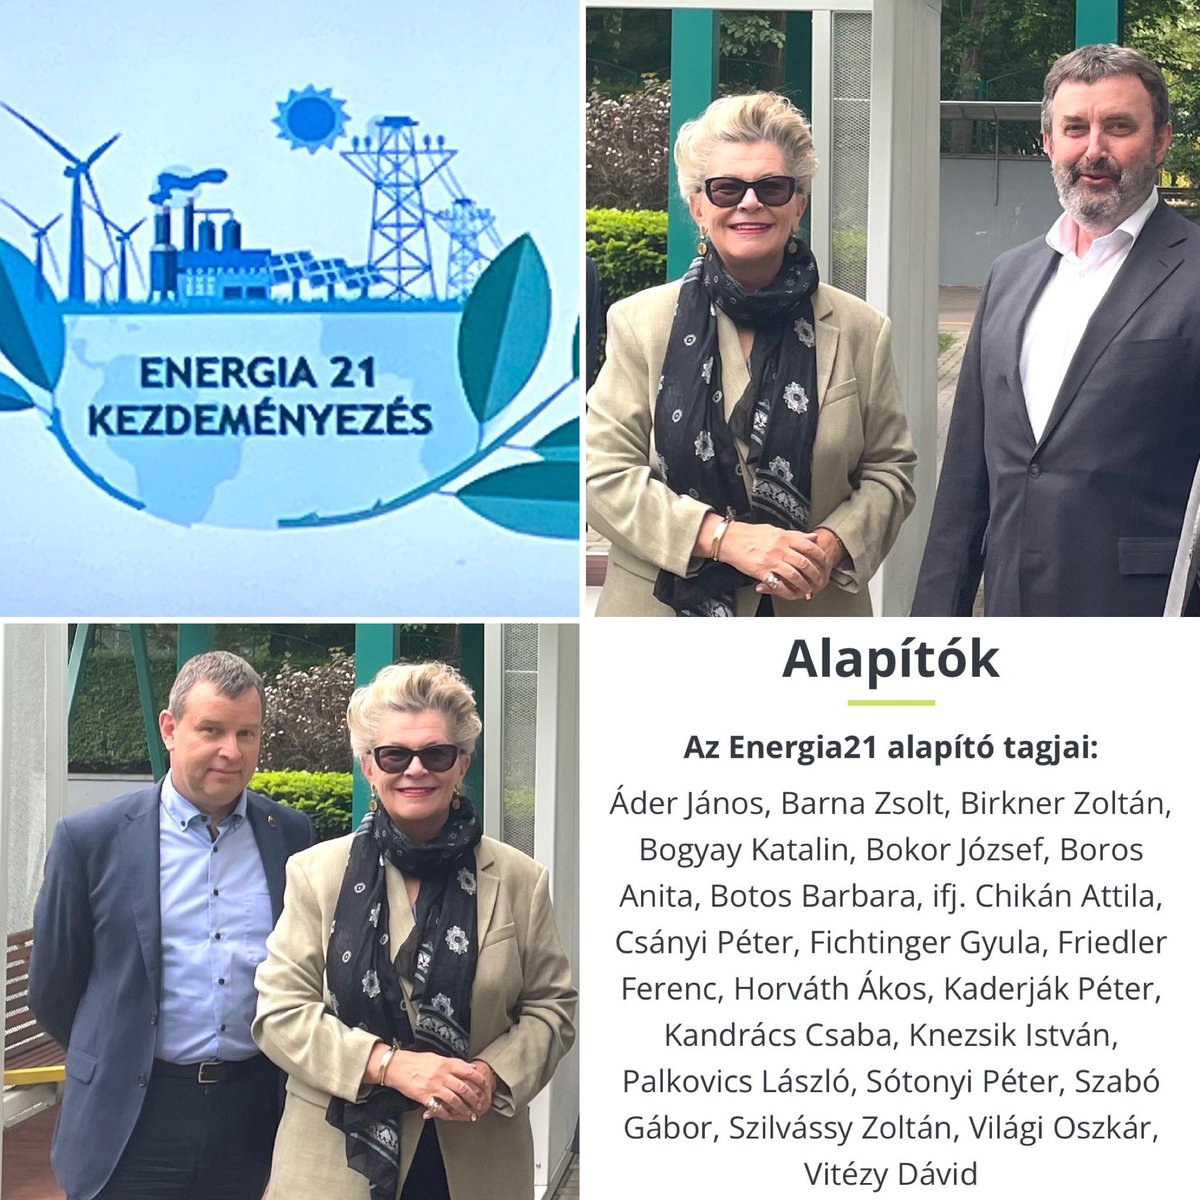 Happy to be one of the founding members of the Energy 21 Initiative to discuss, support&advise policy makers how to change the energy landscape of Hungary into green and strengthen green consciousness! W/Founder-Min. Palkovics @university_gyor & Rector of @PannonEgyetem #E21